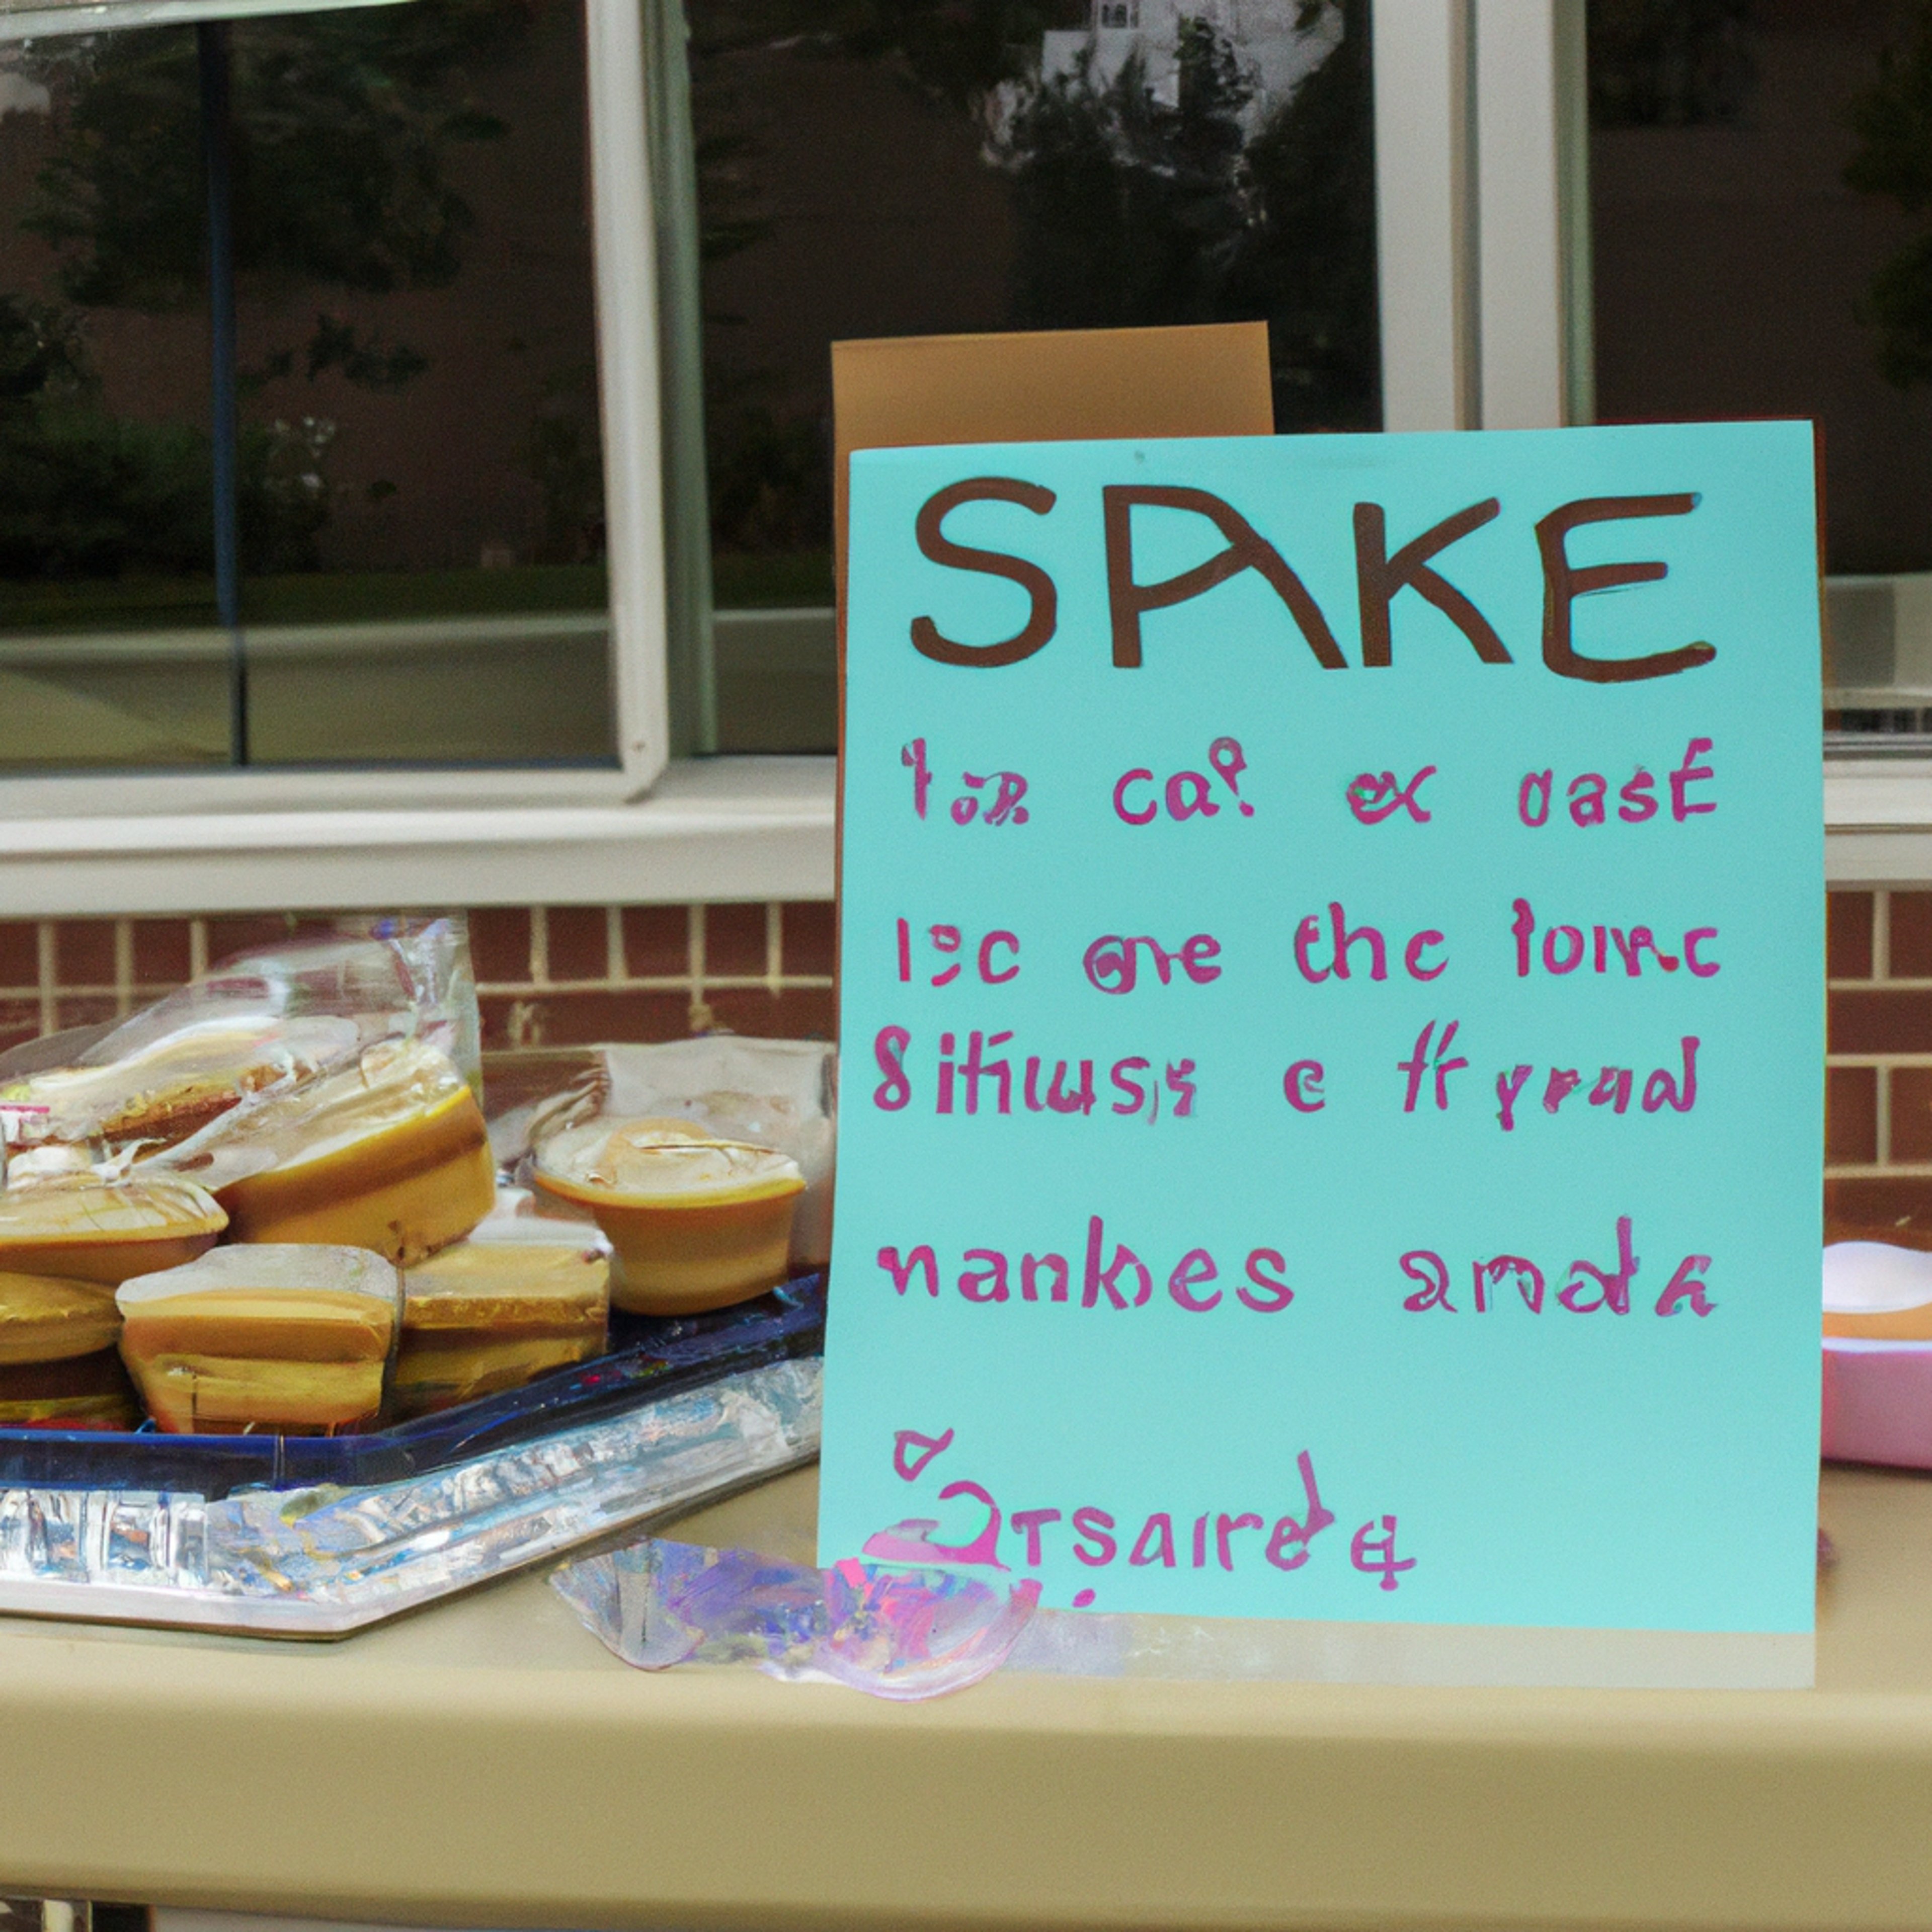 Local School Raises Funds for New Library Through Bake Sale